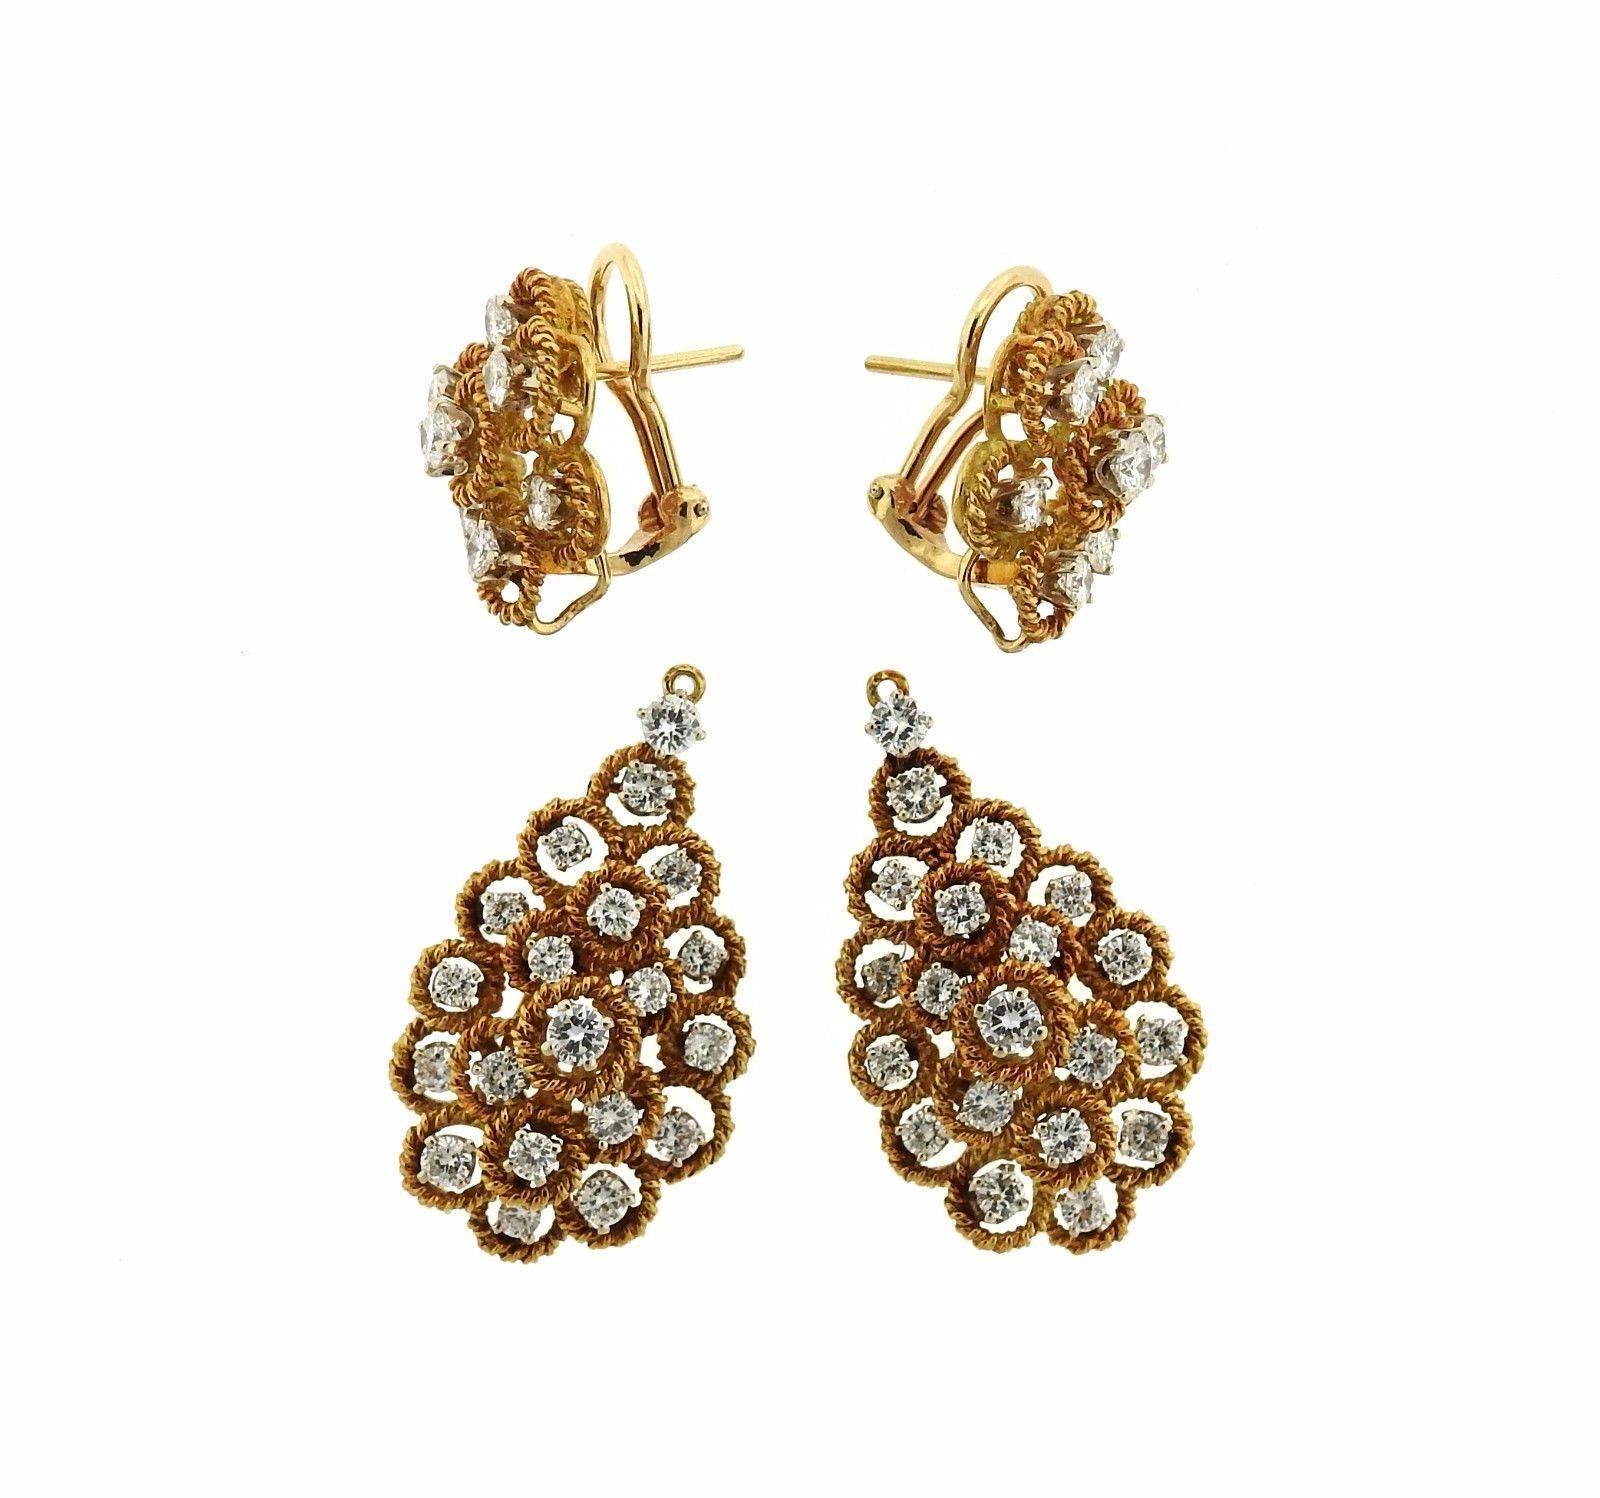 A pair of 18k yellow gold earrings set with approximately 4.00-4.20ctw of G/VS diamonds.  The earrings are 50mm long with drops, without drops - 19mm x 15mm.  The weight of the earrings is 24.1 grams.